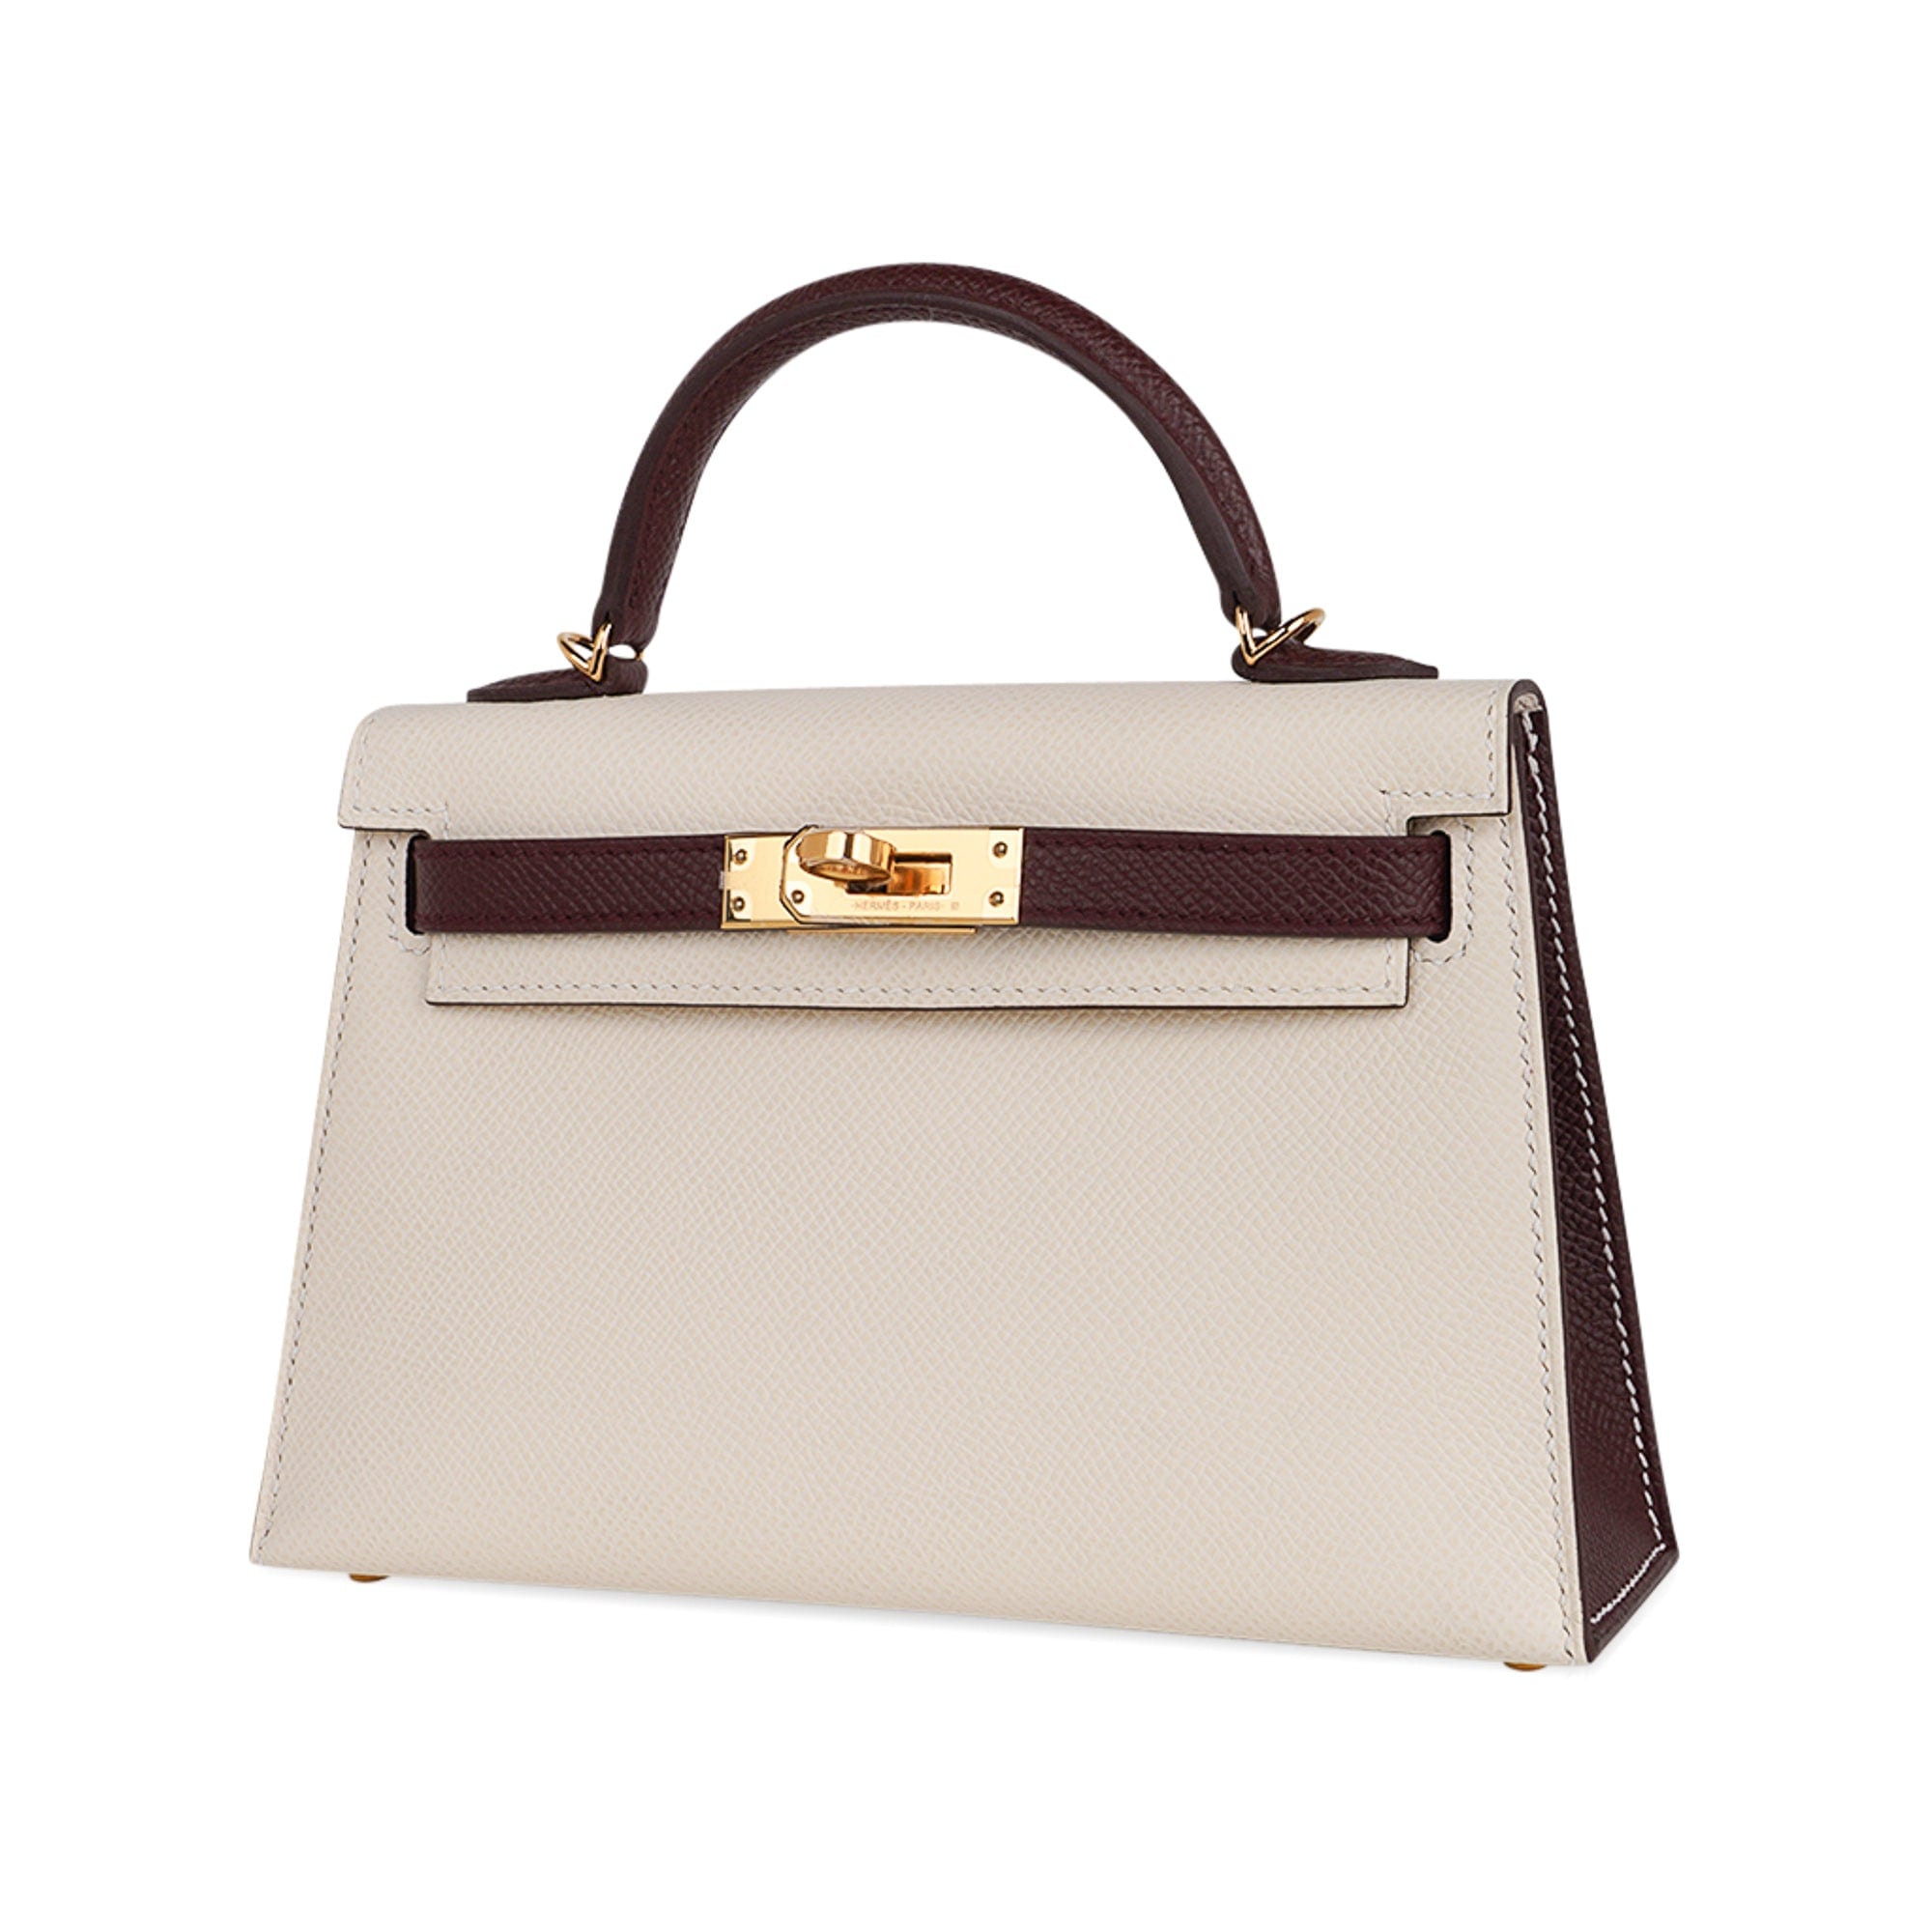 Hermes Special Order HSS Mini Kelly 20 Sellier Bag in Nata and